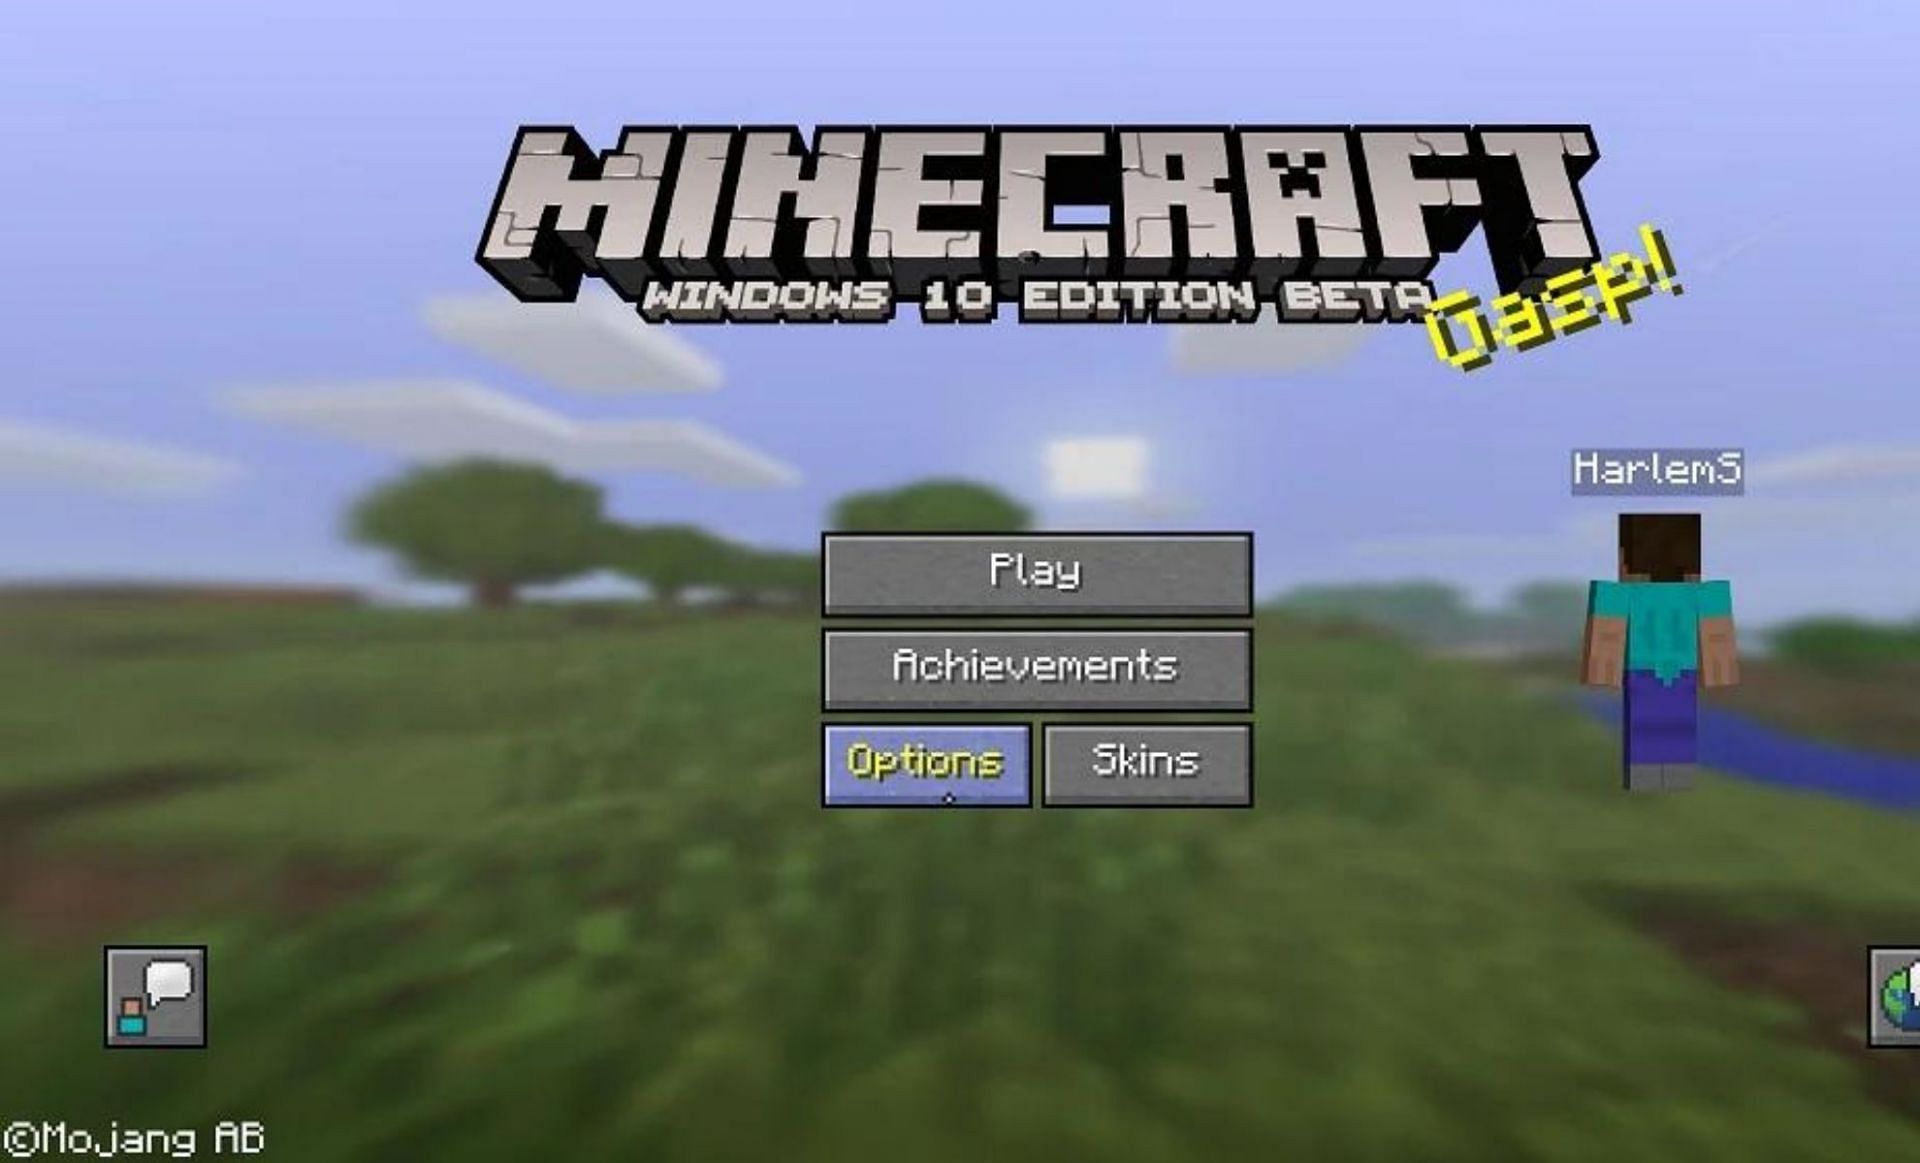 Both versions are available for Windows players (Image via Mojang)